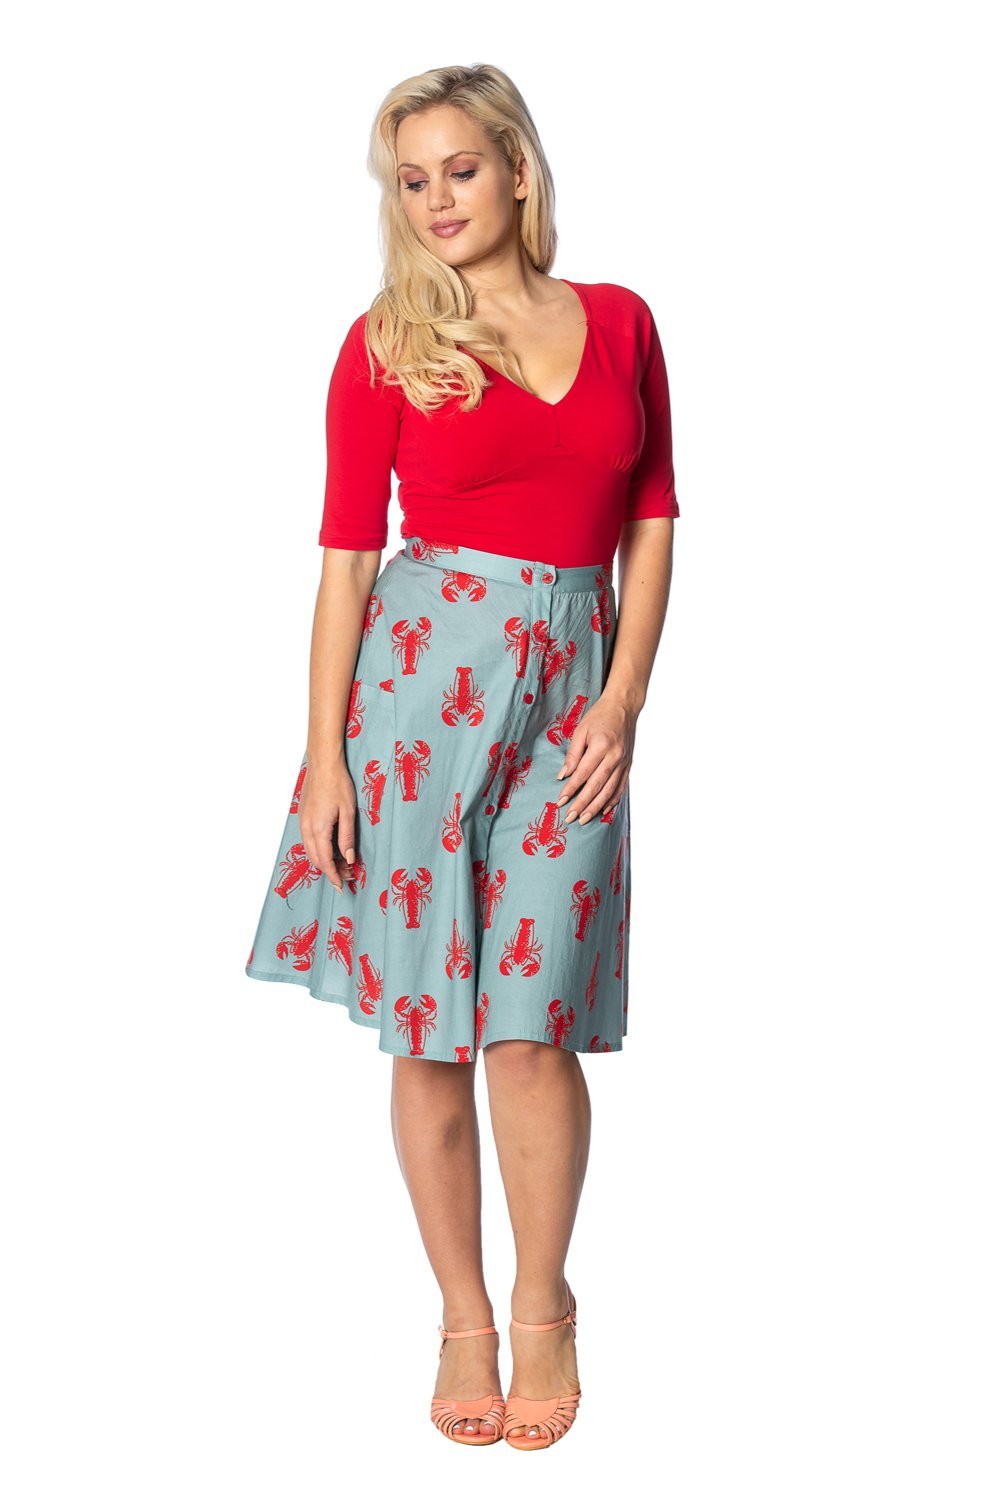 Lobster Love Skirt By Banned Apparel - Minimum Mouse